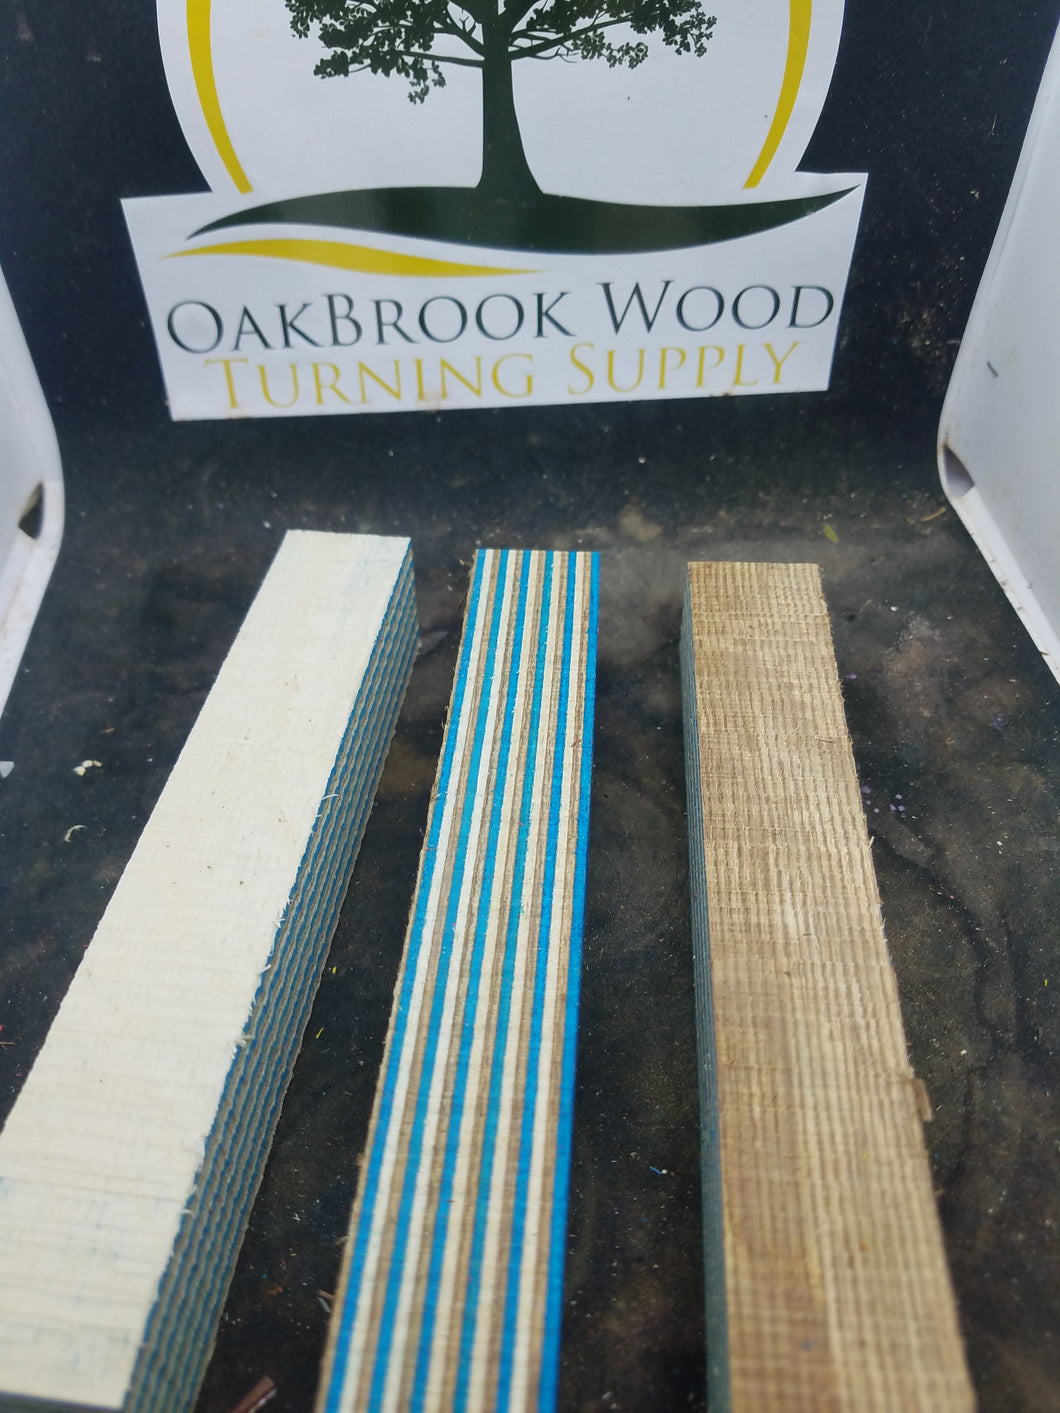 spectraply Rising Tide - Oakbrook Wood Turning Supply